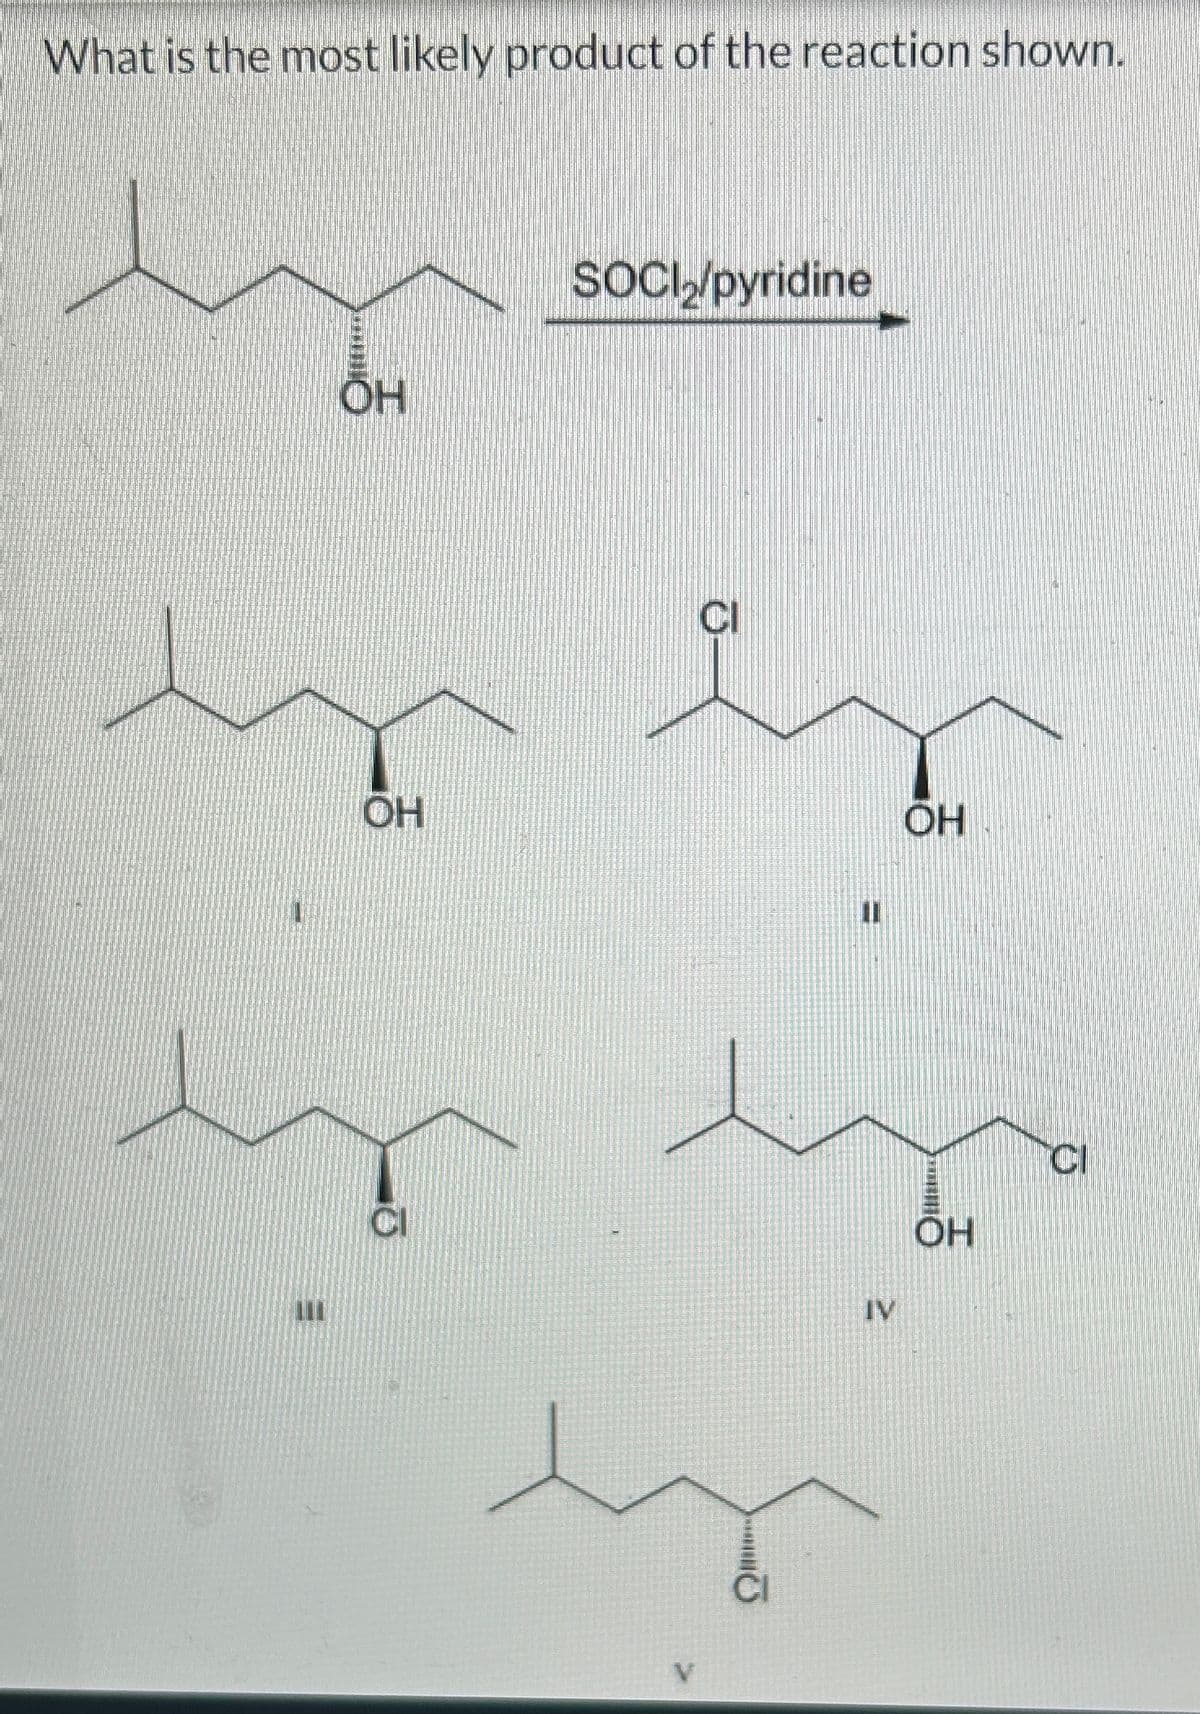 What is the most likely product of the reaction shown.
1
OH
OH
SOCI₂/pyridine
CI
IV
OH
OH
CI